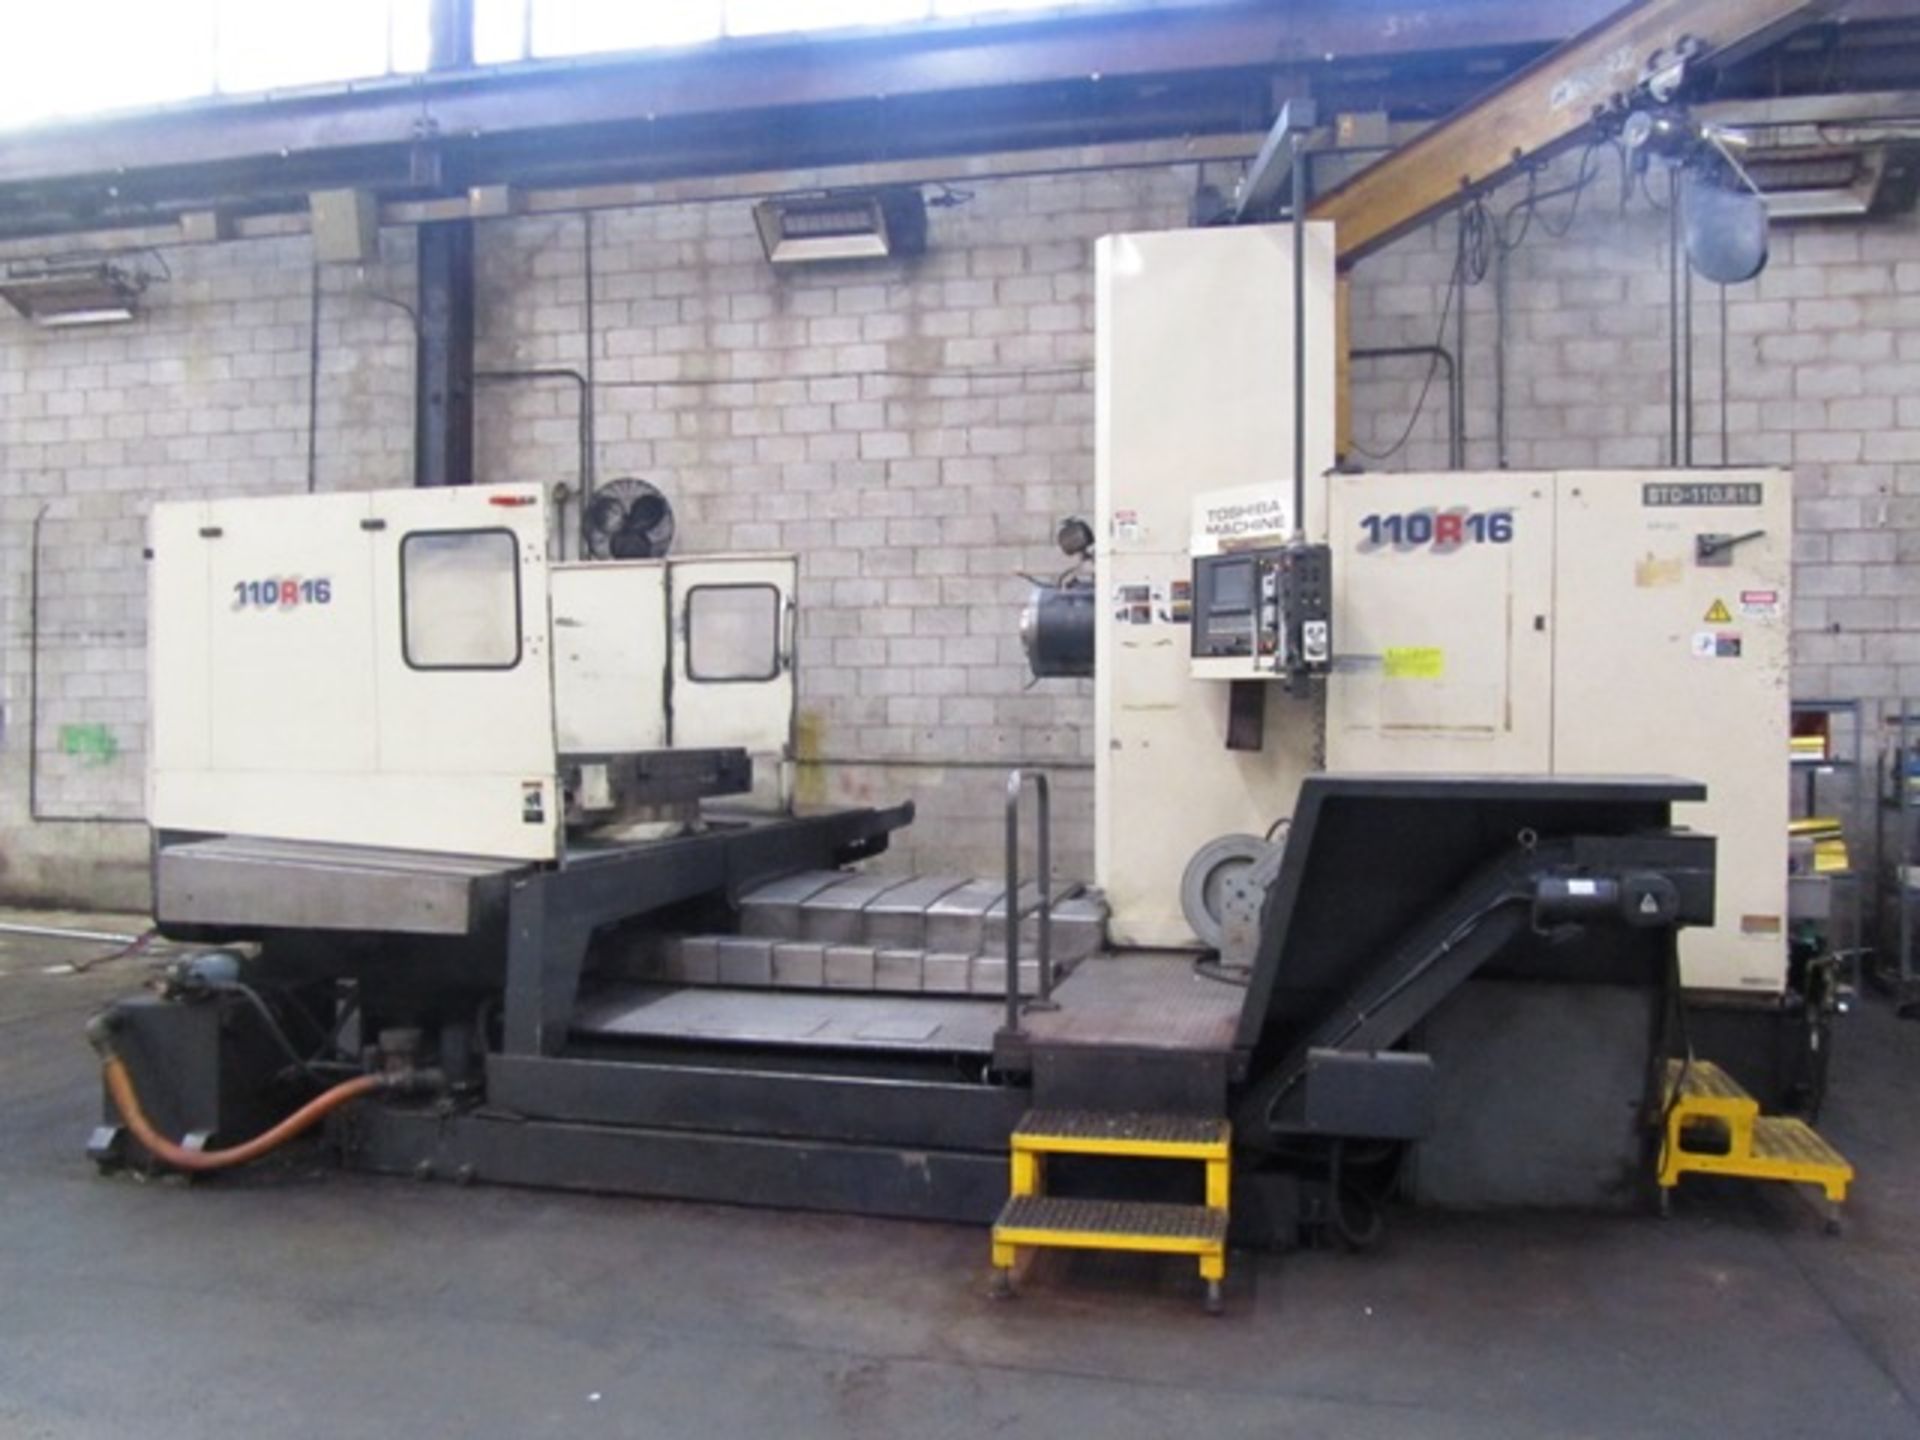 Toshiba BTD-110.R16 4.33'' CNC Table Type Horizontal Boring Mill with 38-ATC, 78.74'' X-Axis, 59. - Image 4 of 6